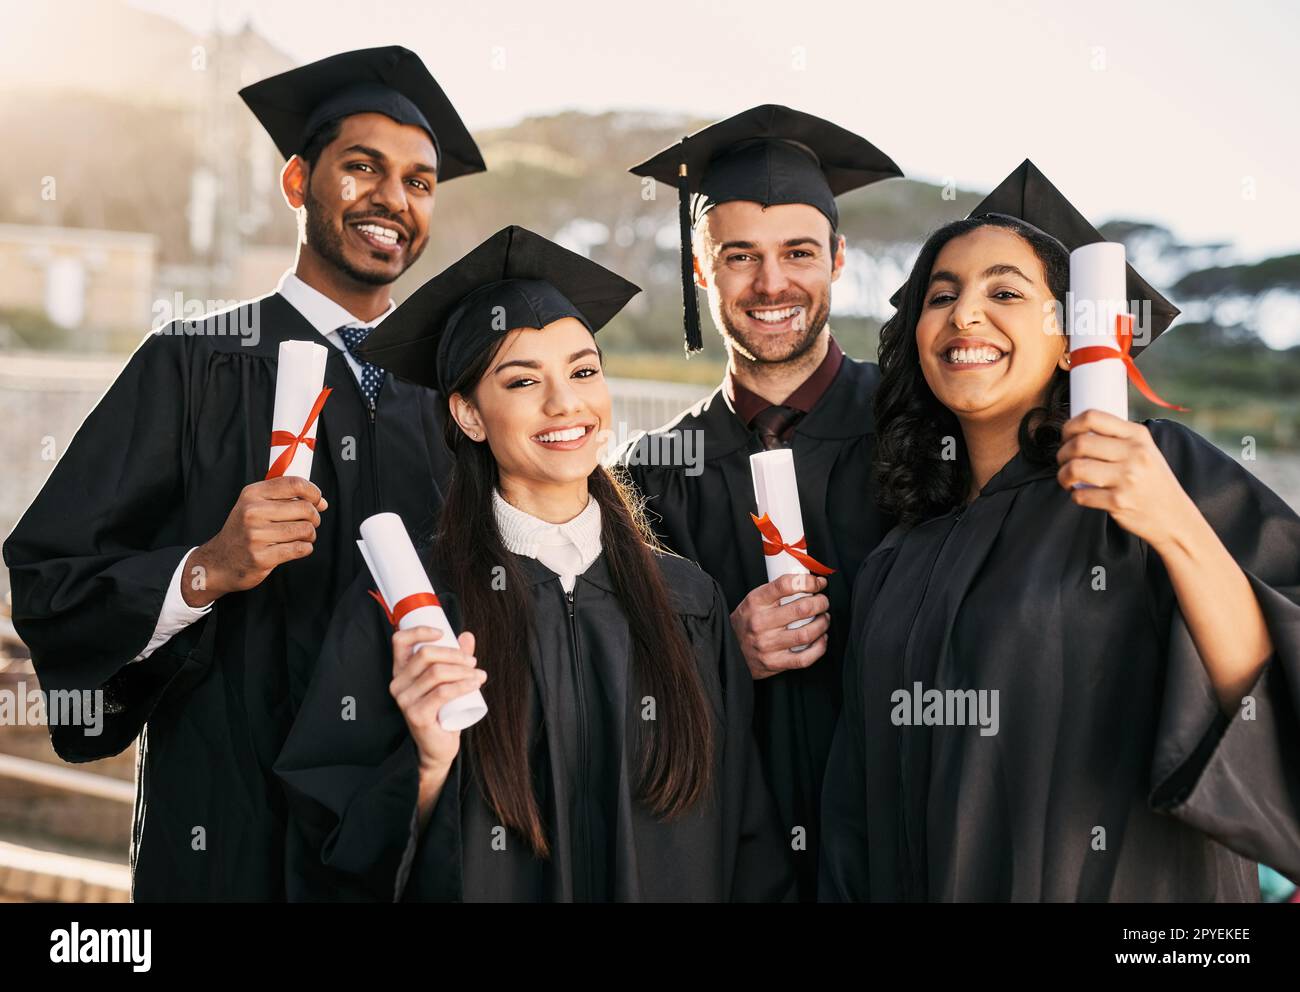 Successful careers - here we come. Portrait of a group of students celebrating with their diplomas on graduation day. Stock Photo